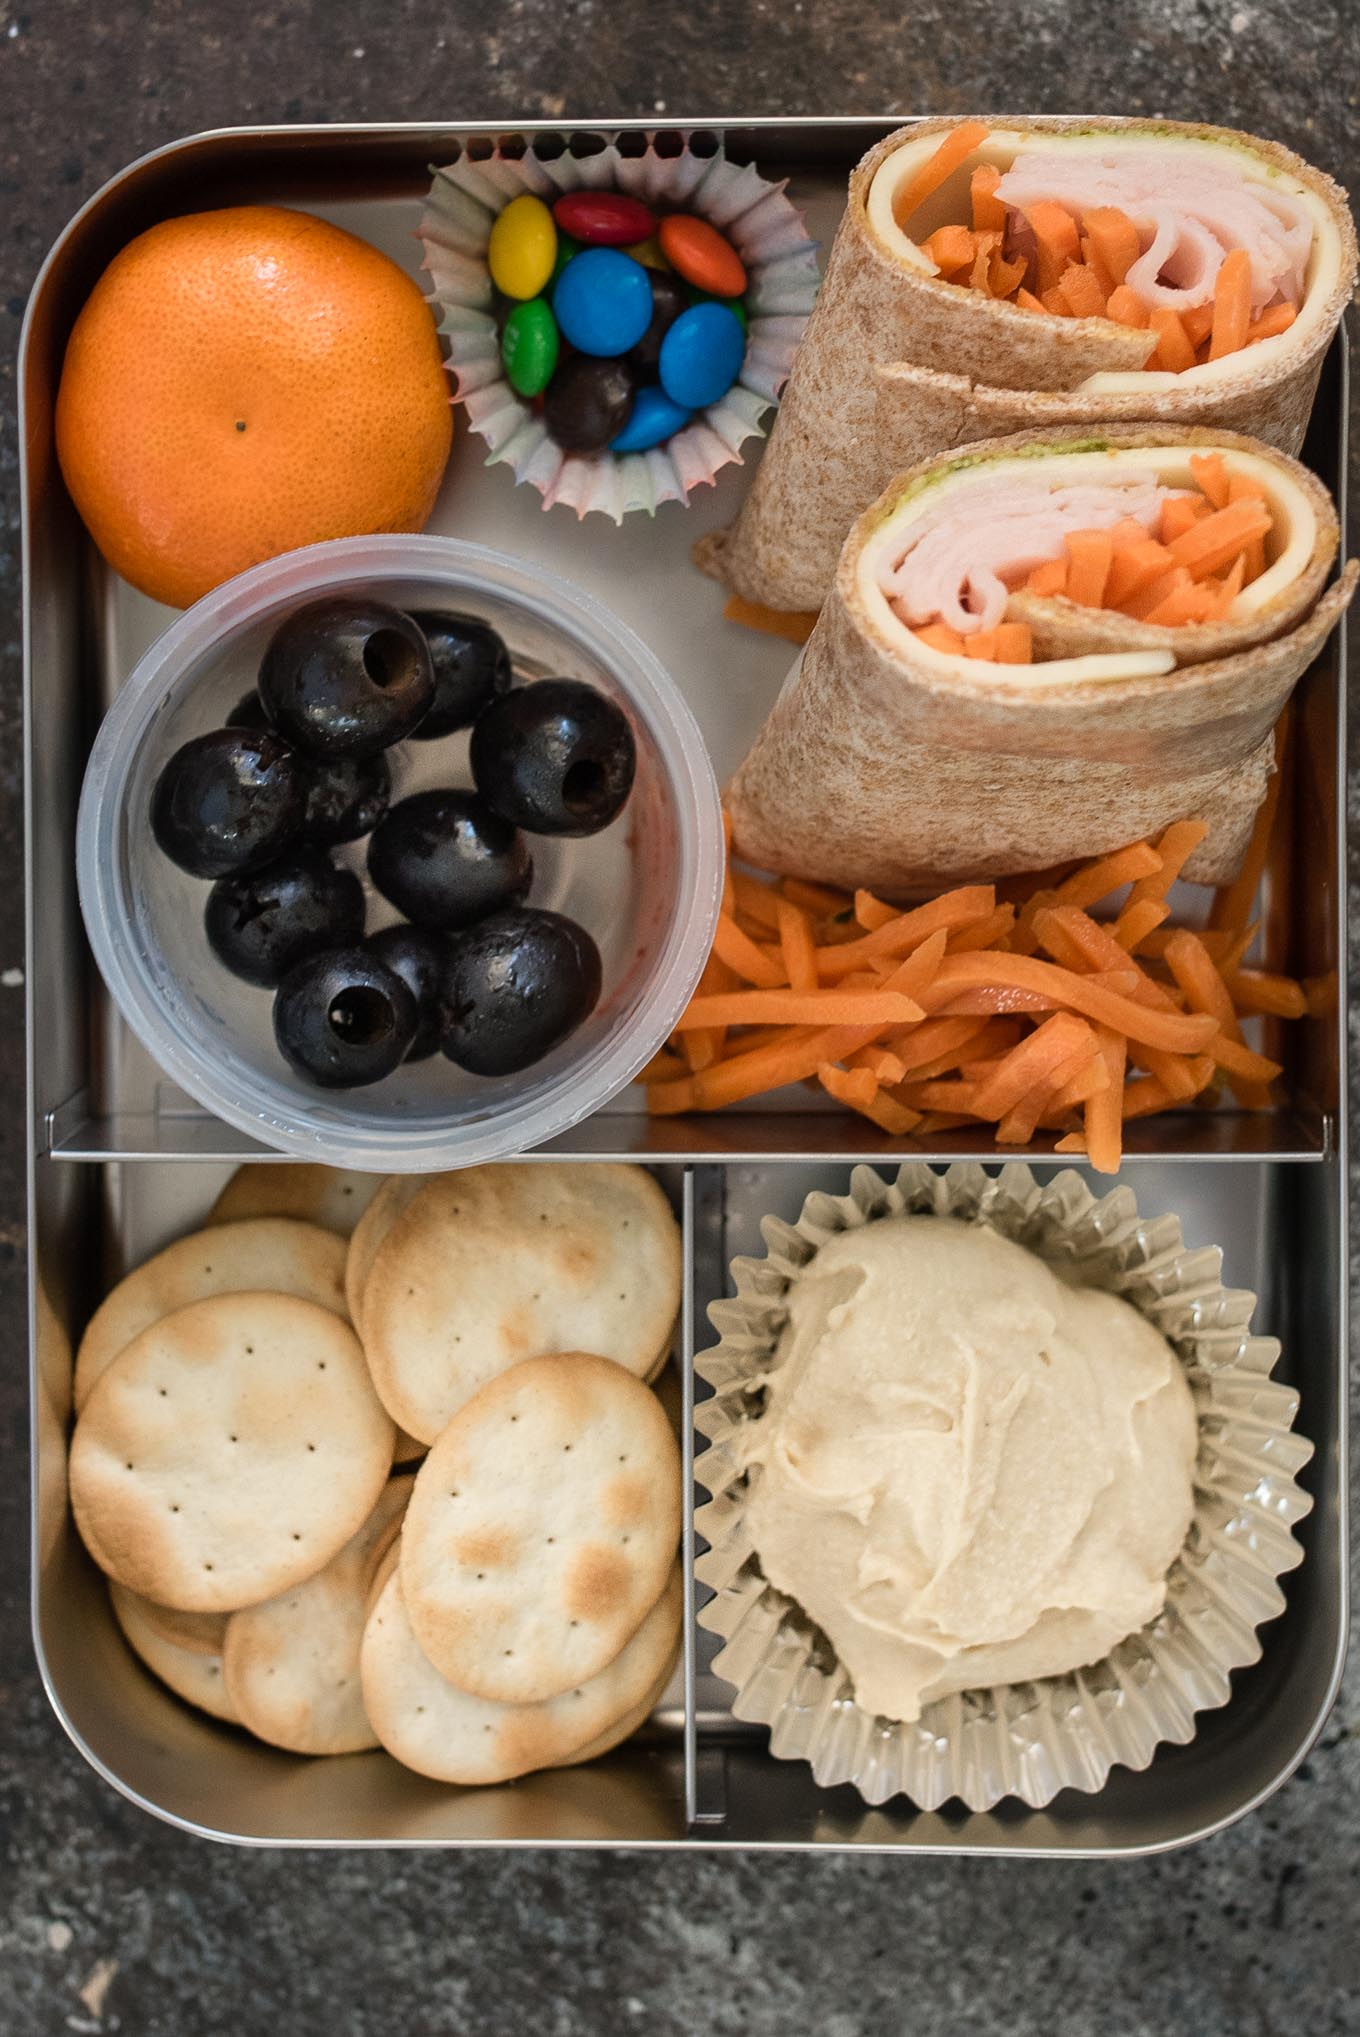 Enjoy these 10 nutritious, well-balanced, kid (and adult) friendly lunch box ideas that will inspire you to get packing! Plus a fun Pancake Sandwich recipe that your kids will love.